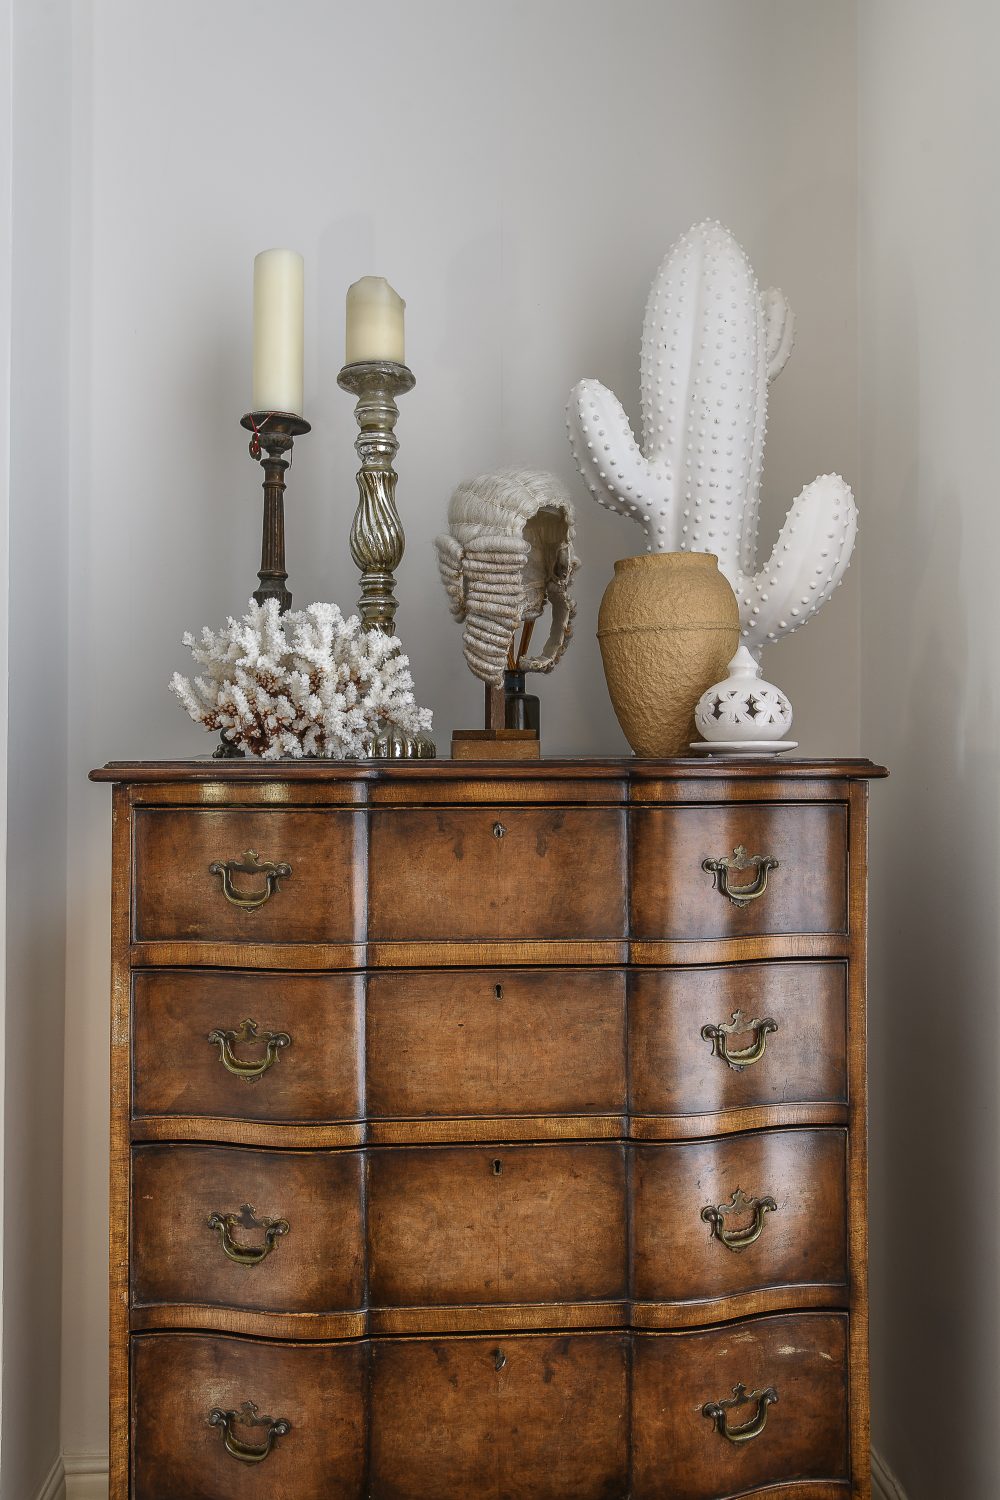 A large bow-fronted chest of drawers was bought at an antique depot in Bexhill Road